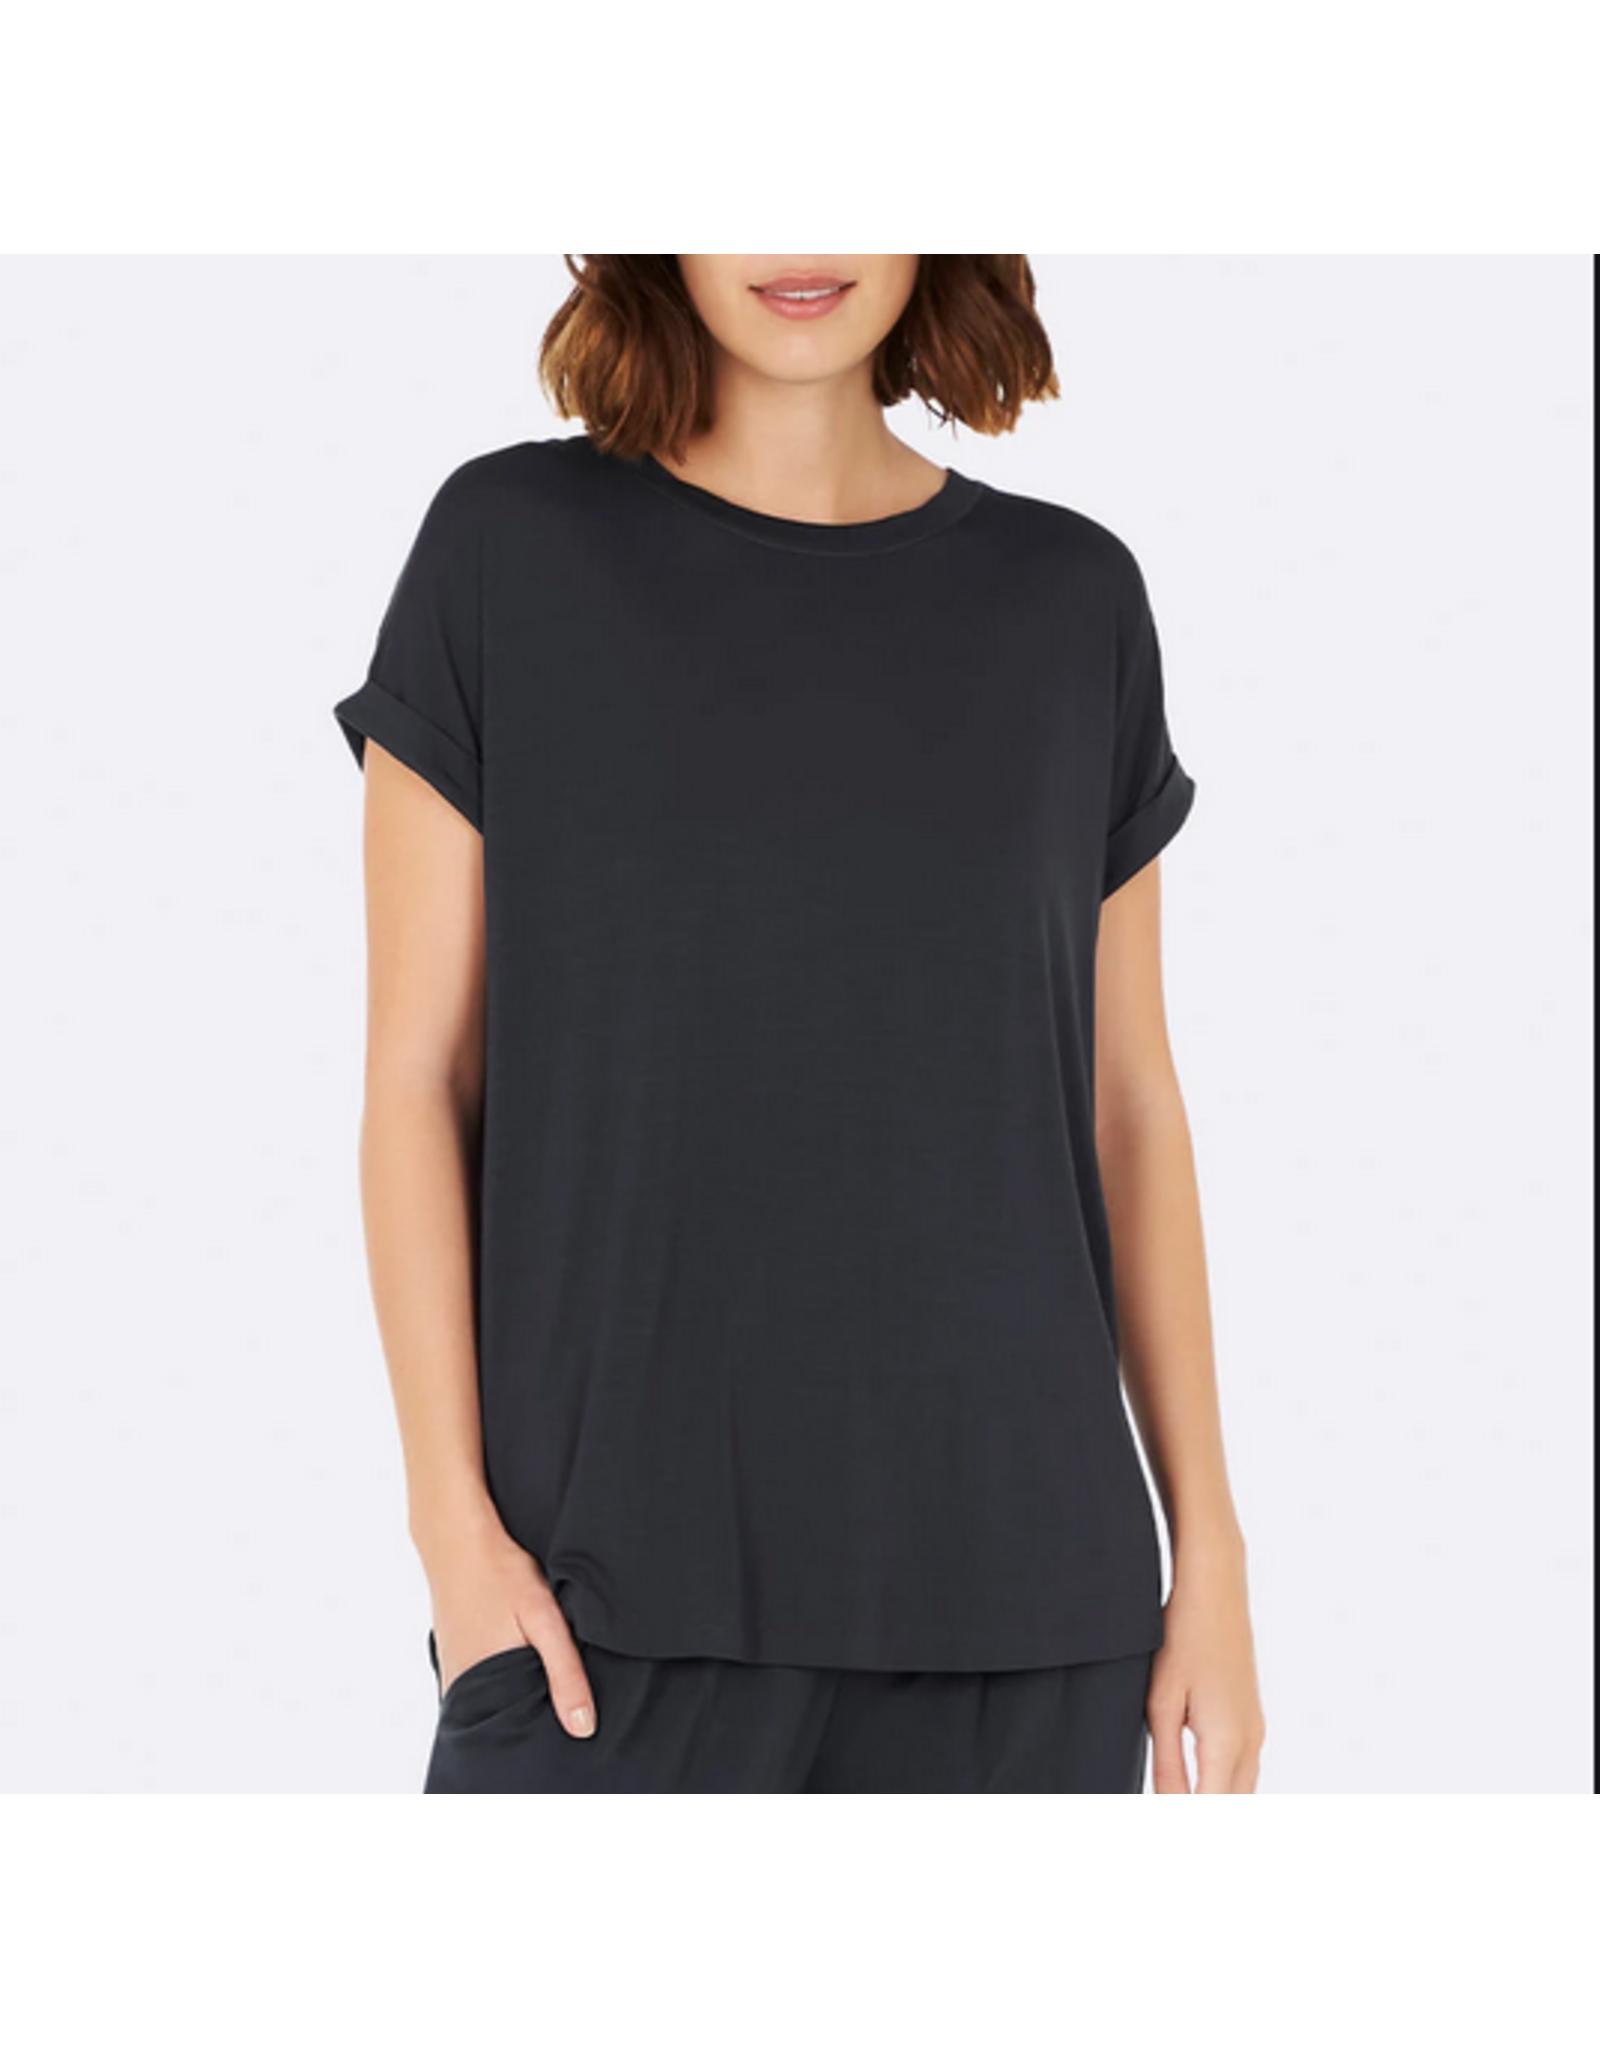 Boody Downtime Lounge Top